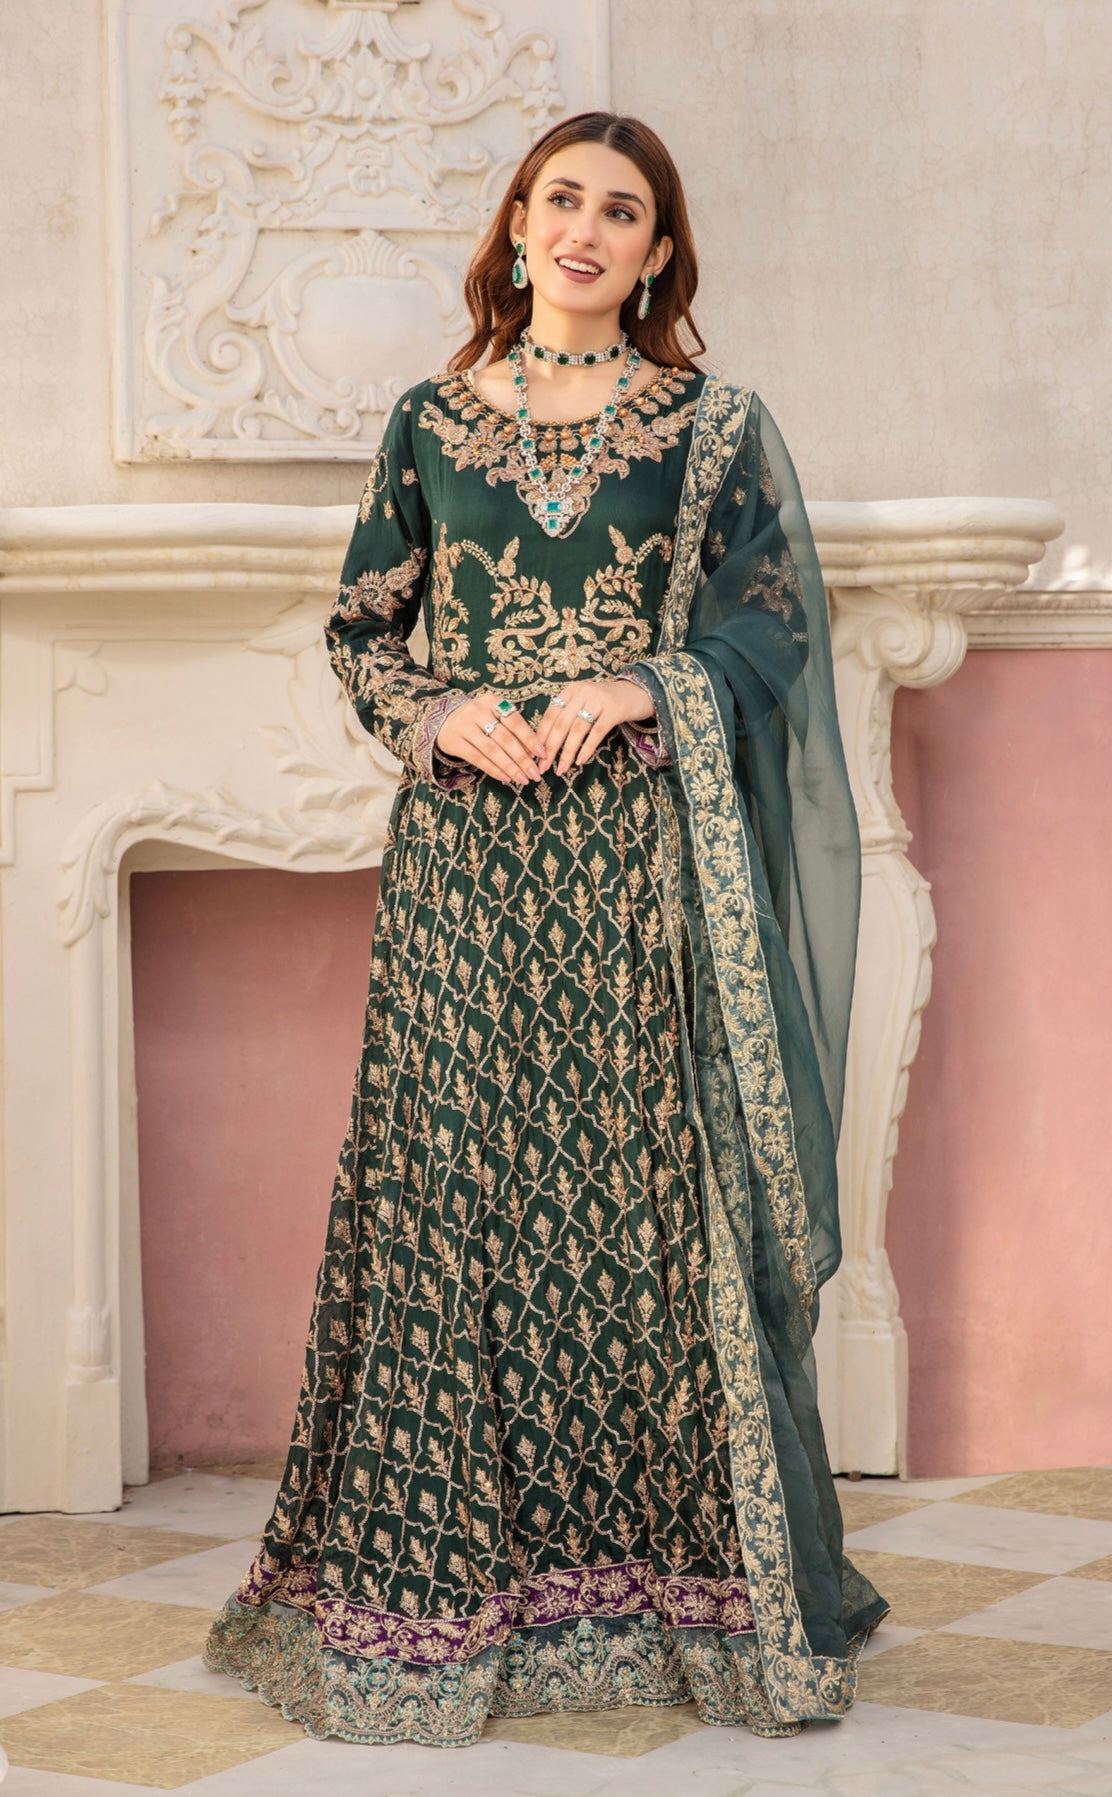 SIMRANS Ivana 3 piece chiffon embroidered collection in dark green ICD-006